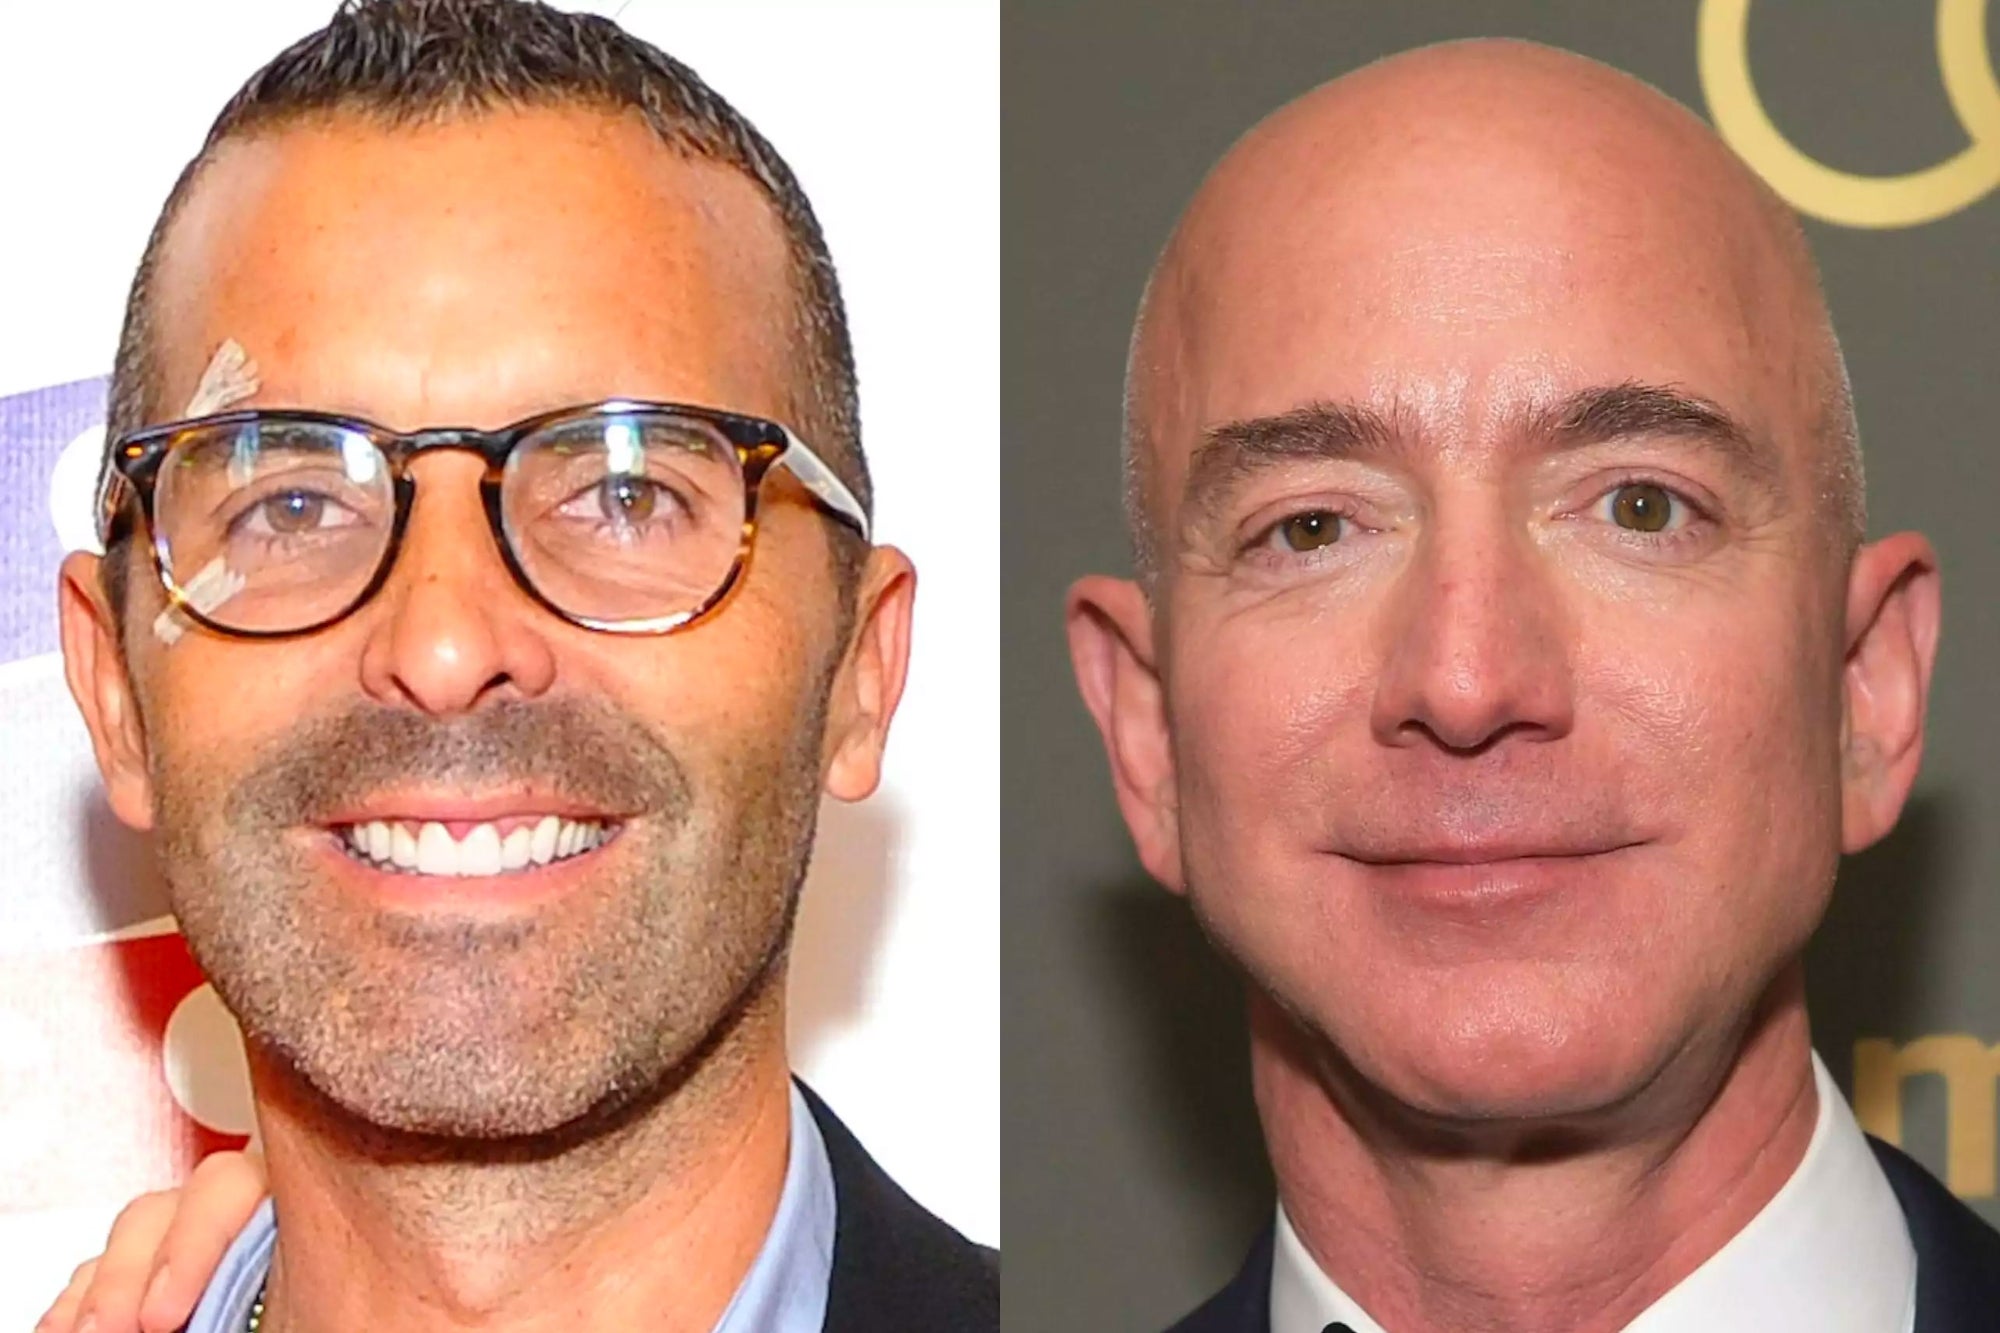 Jeff Bezos Wants His Girlfriend's Brother to Cover $1.7 Million in Legal Fees After He Unsuccessfully Sued Bezos for Defamation